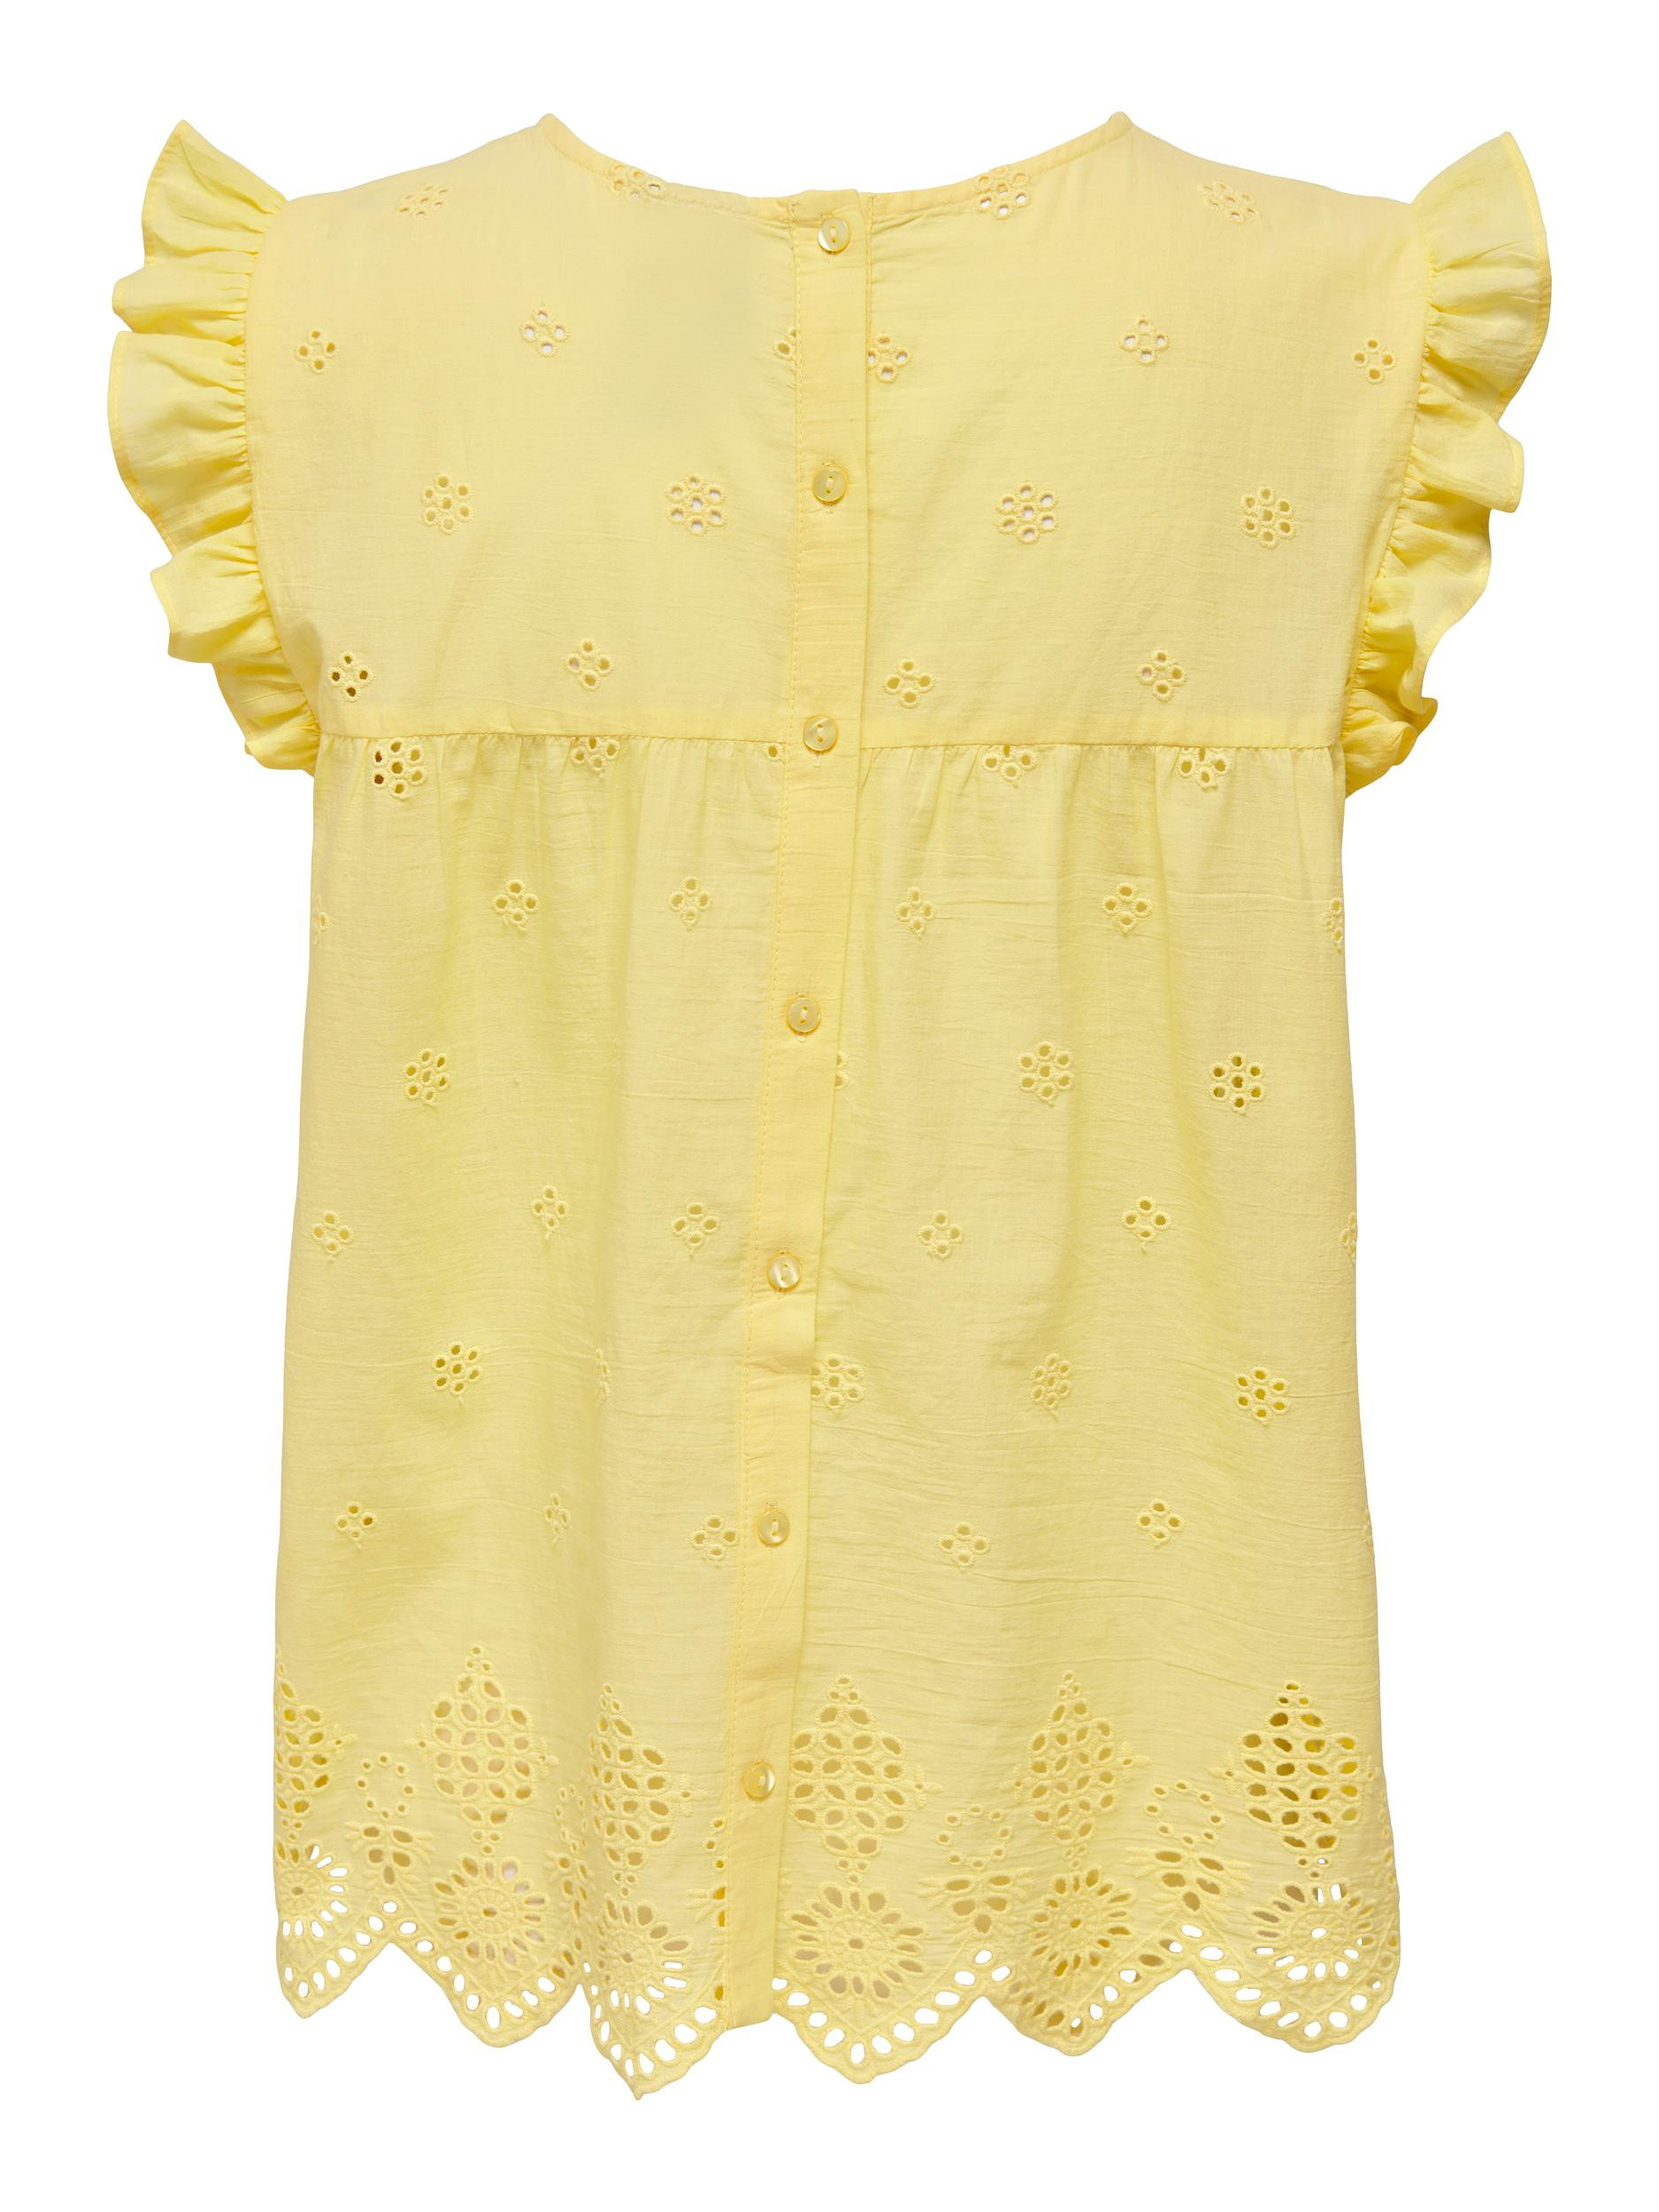 Only - Cotton top, Yellow, large image number 1